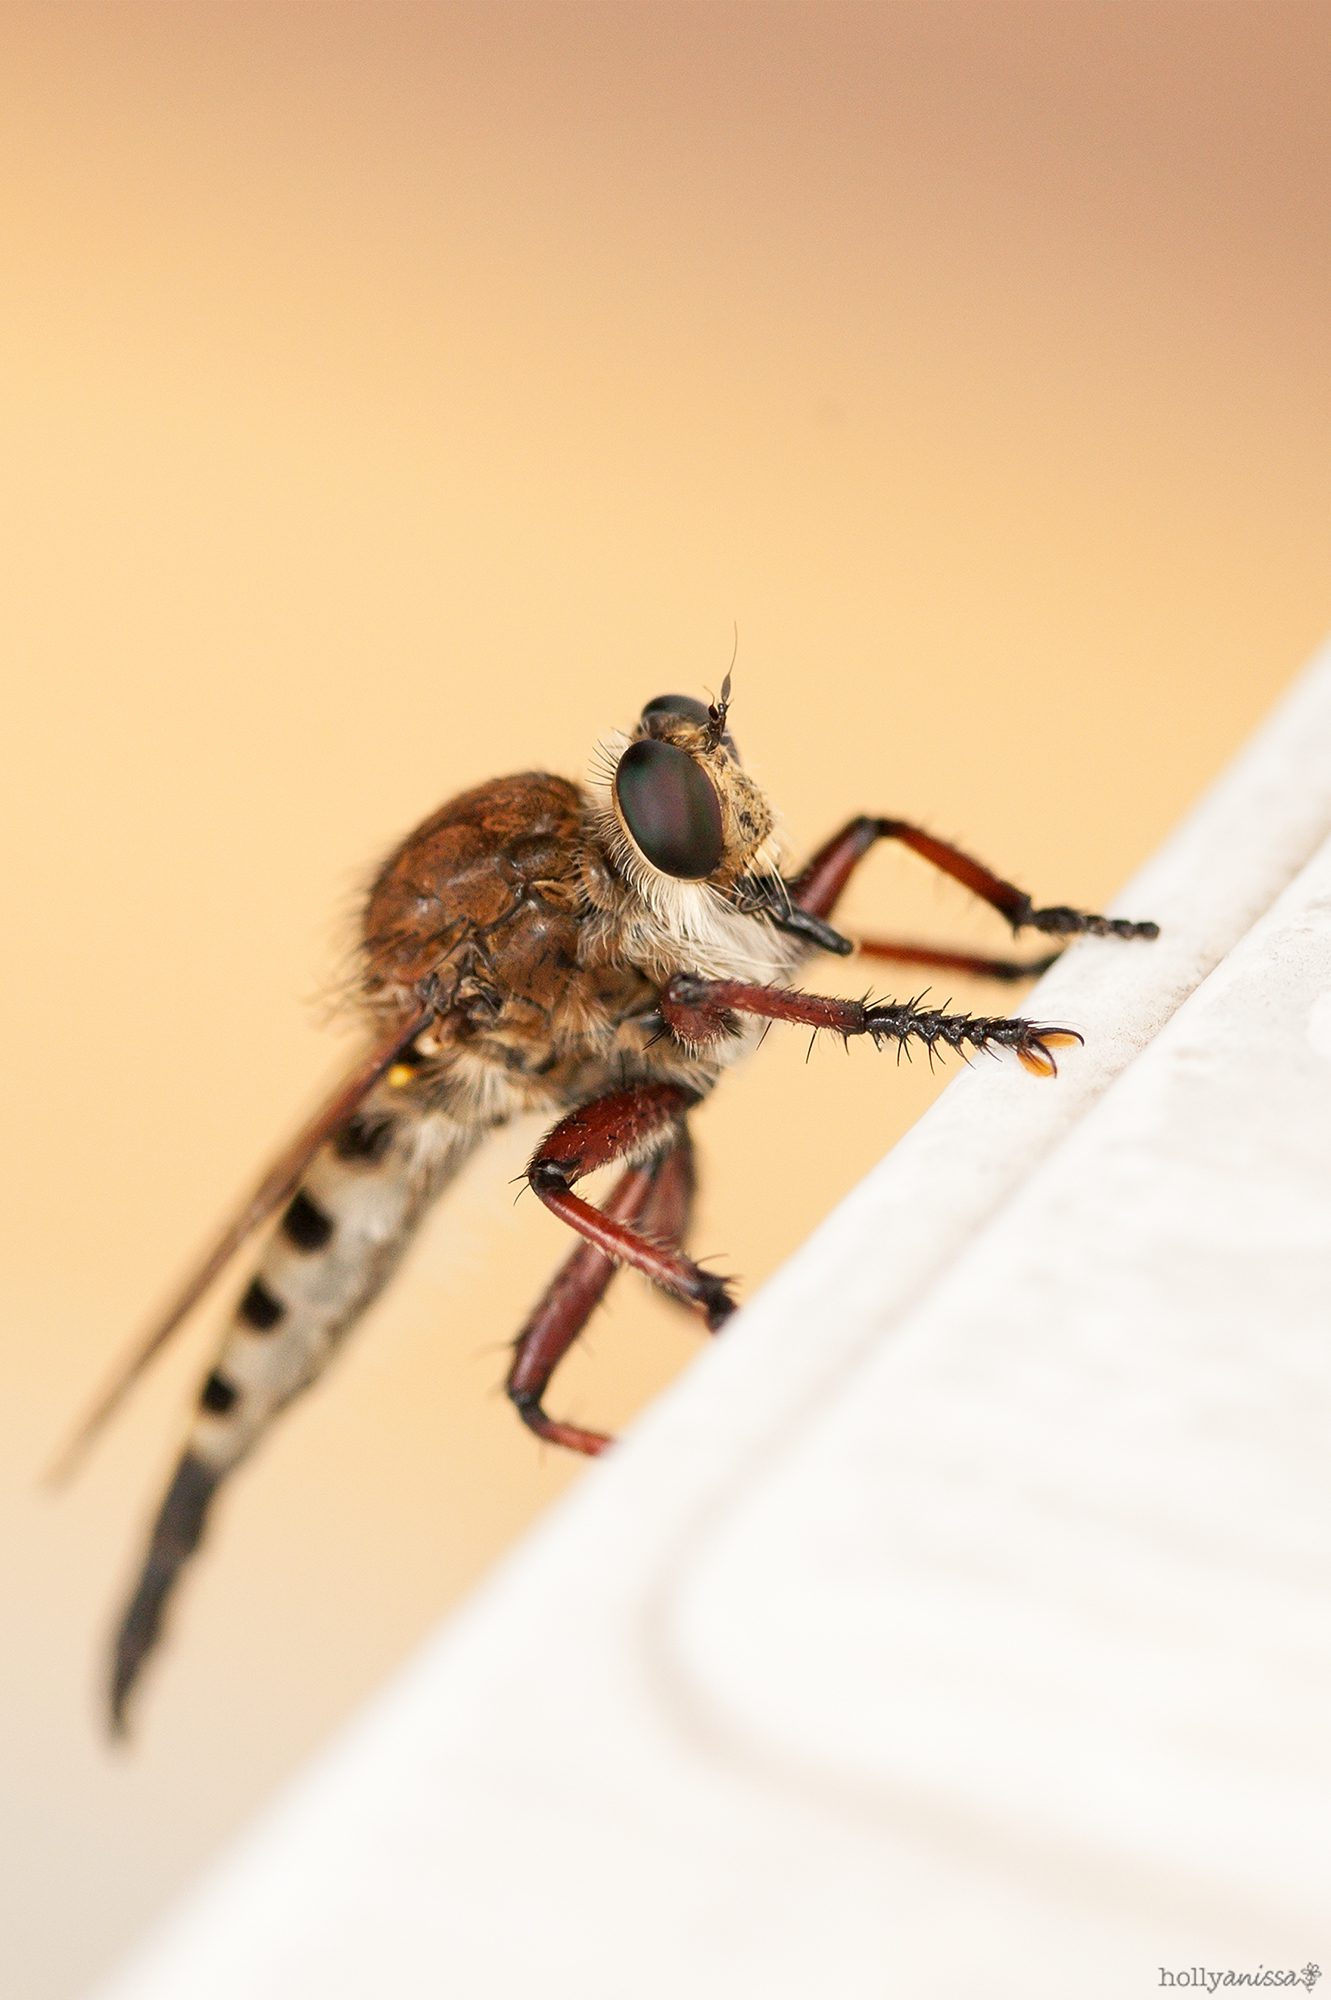 New Braunfels insect nature macro robber fly photographer